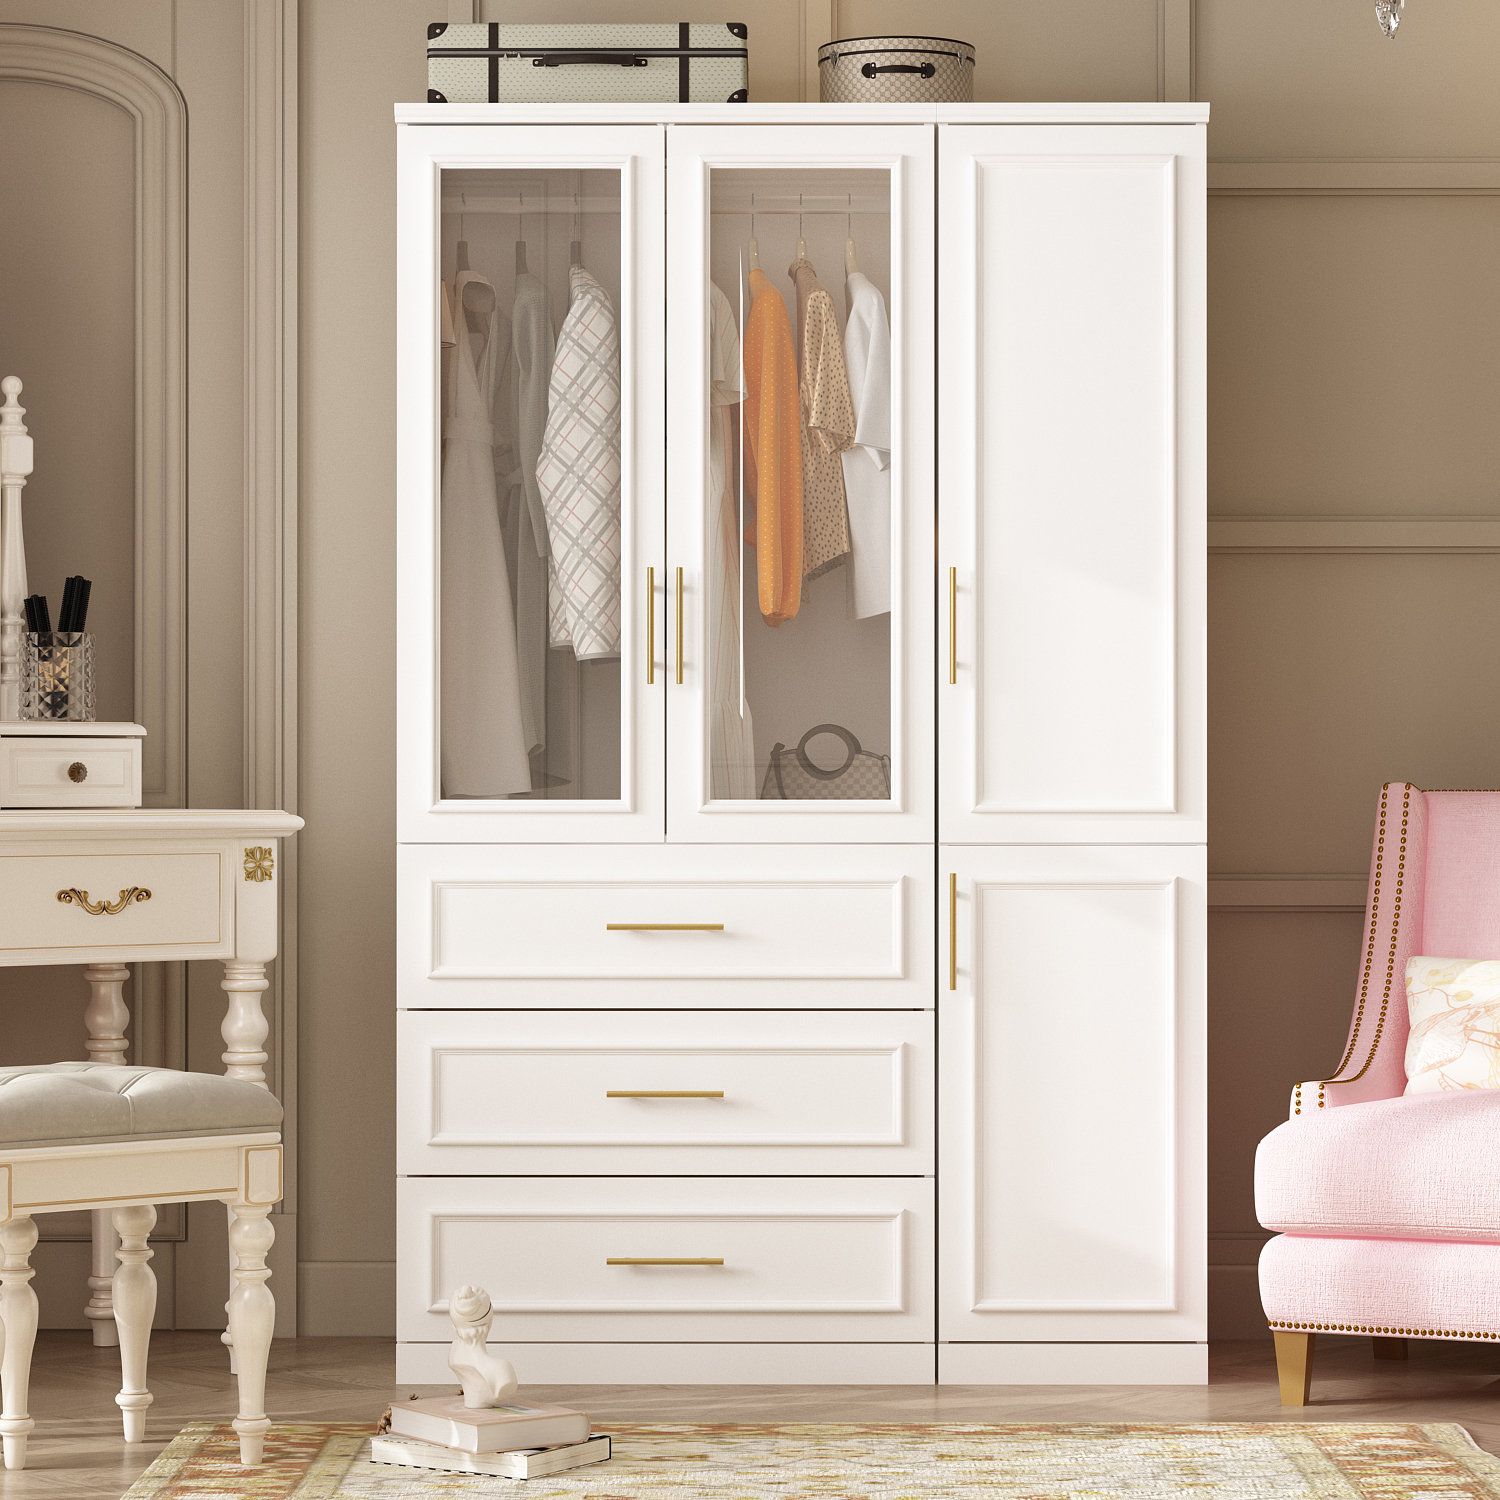 Latitude Run® Armoire | Wayfair With Regard To Wardrobes Chest Of Drawers Combination (View 7 of 15)